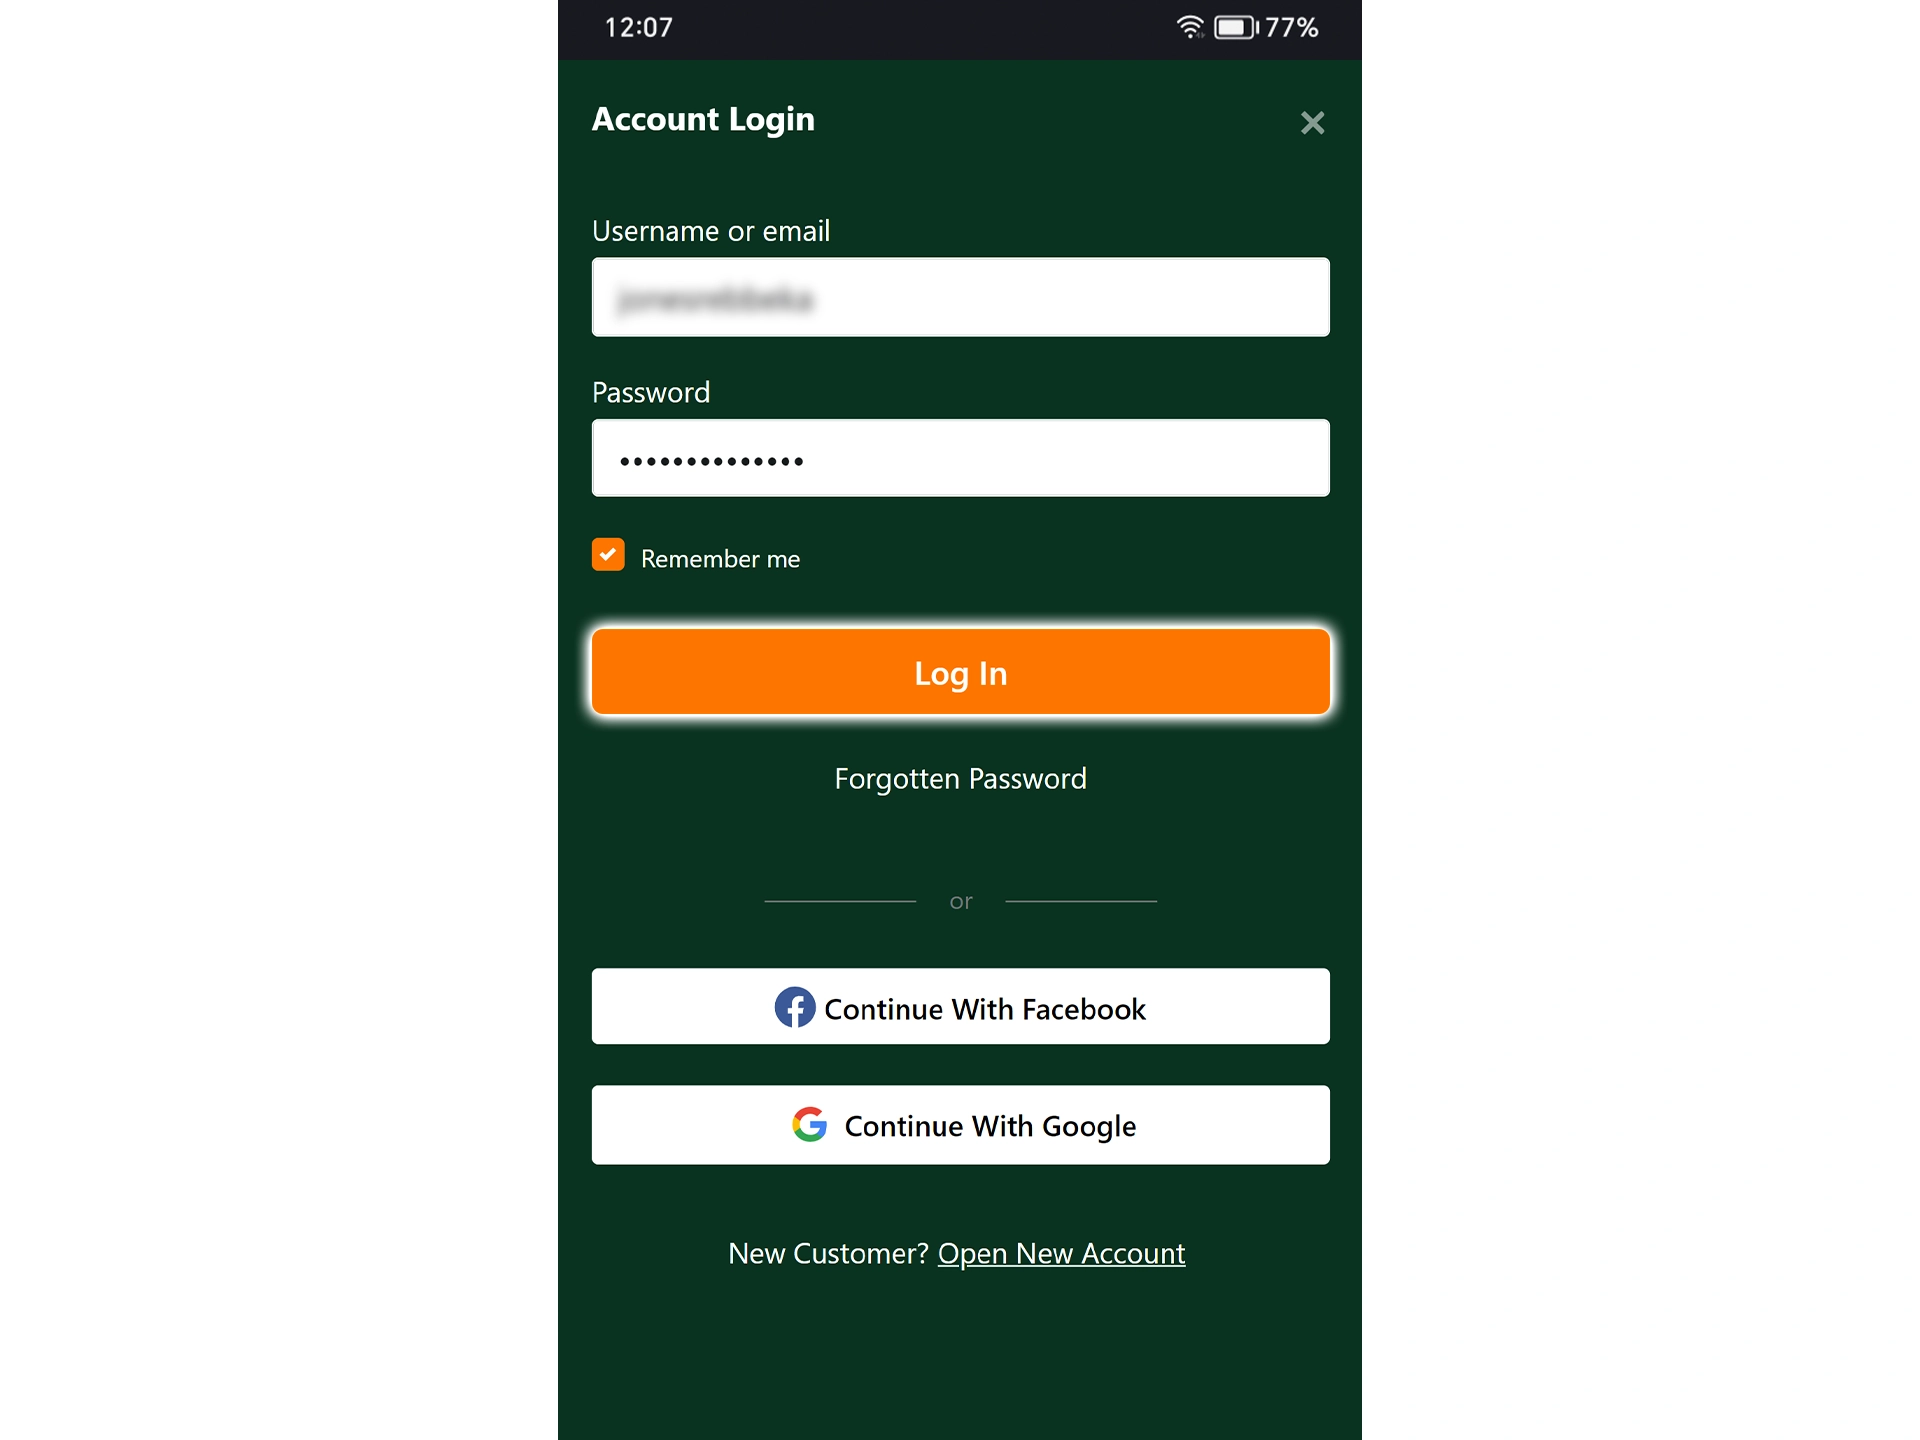 Launch the app and log in to your Cashalot.bet account.